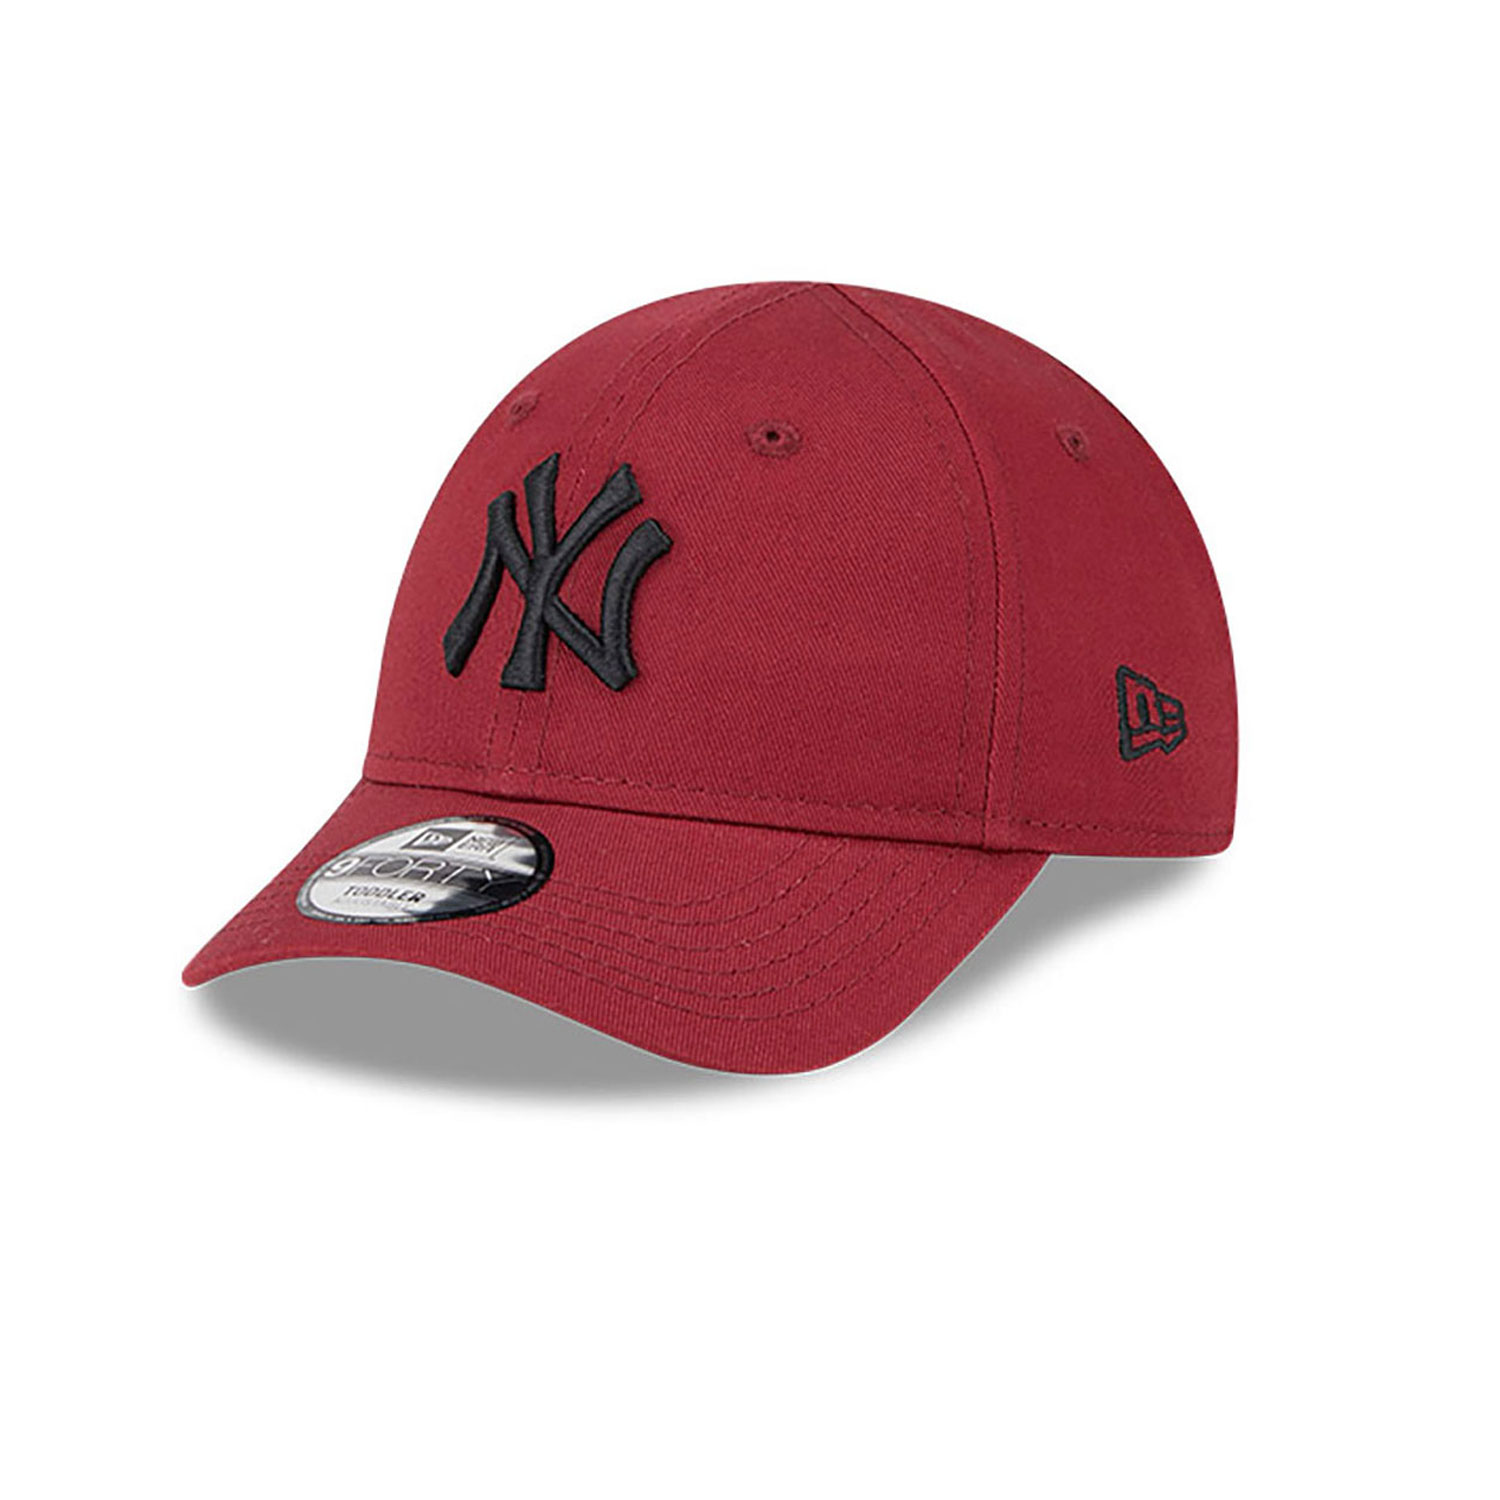 New York Yankees Toddler League Essential Red 9FORTY Adjustable Cap